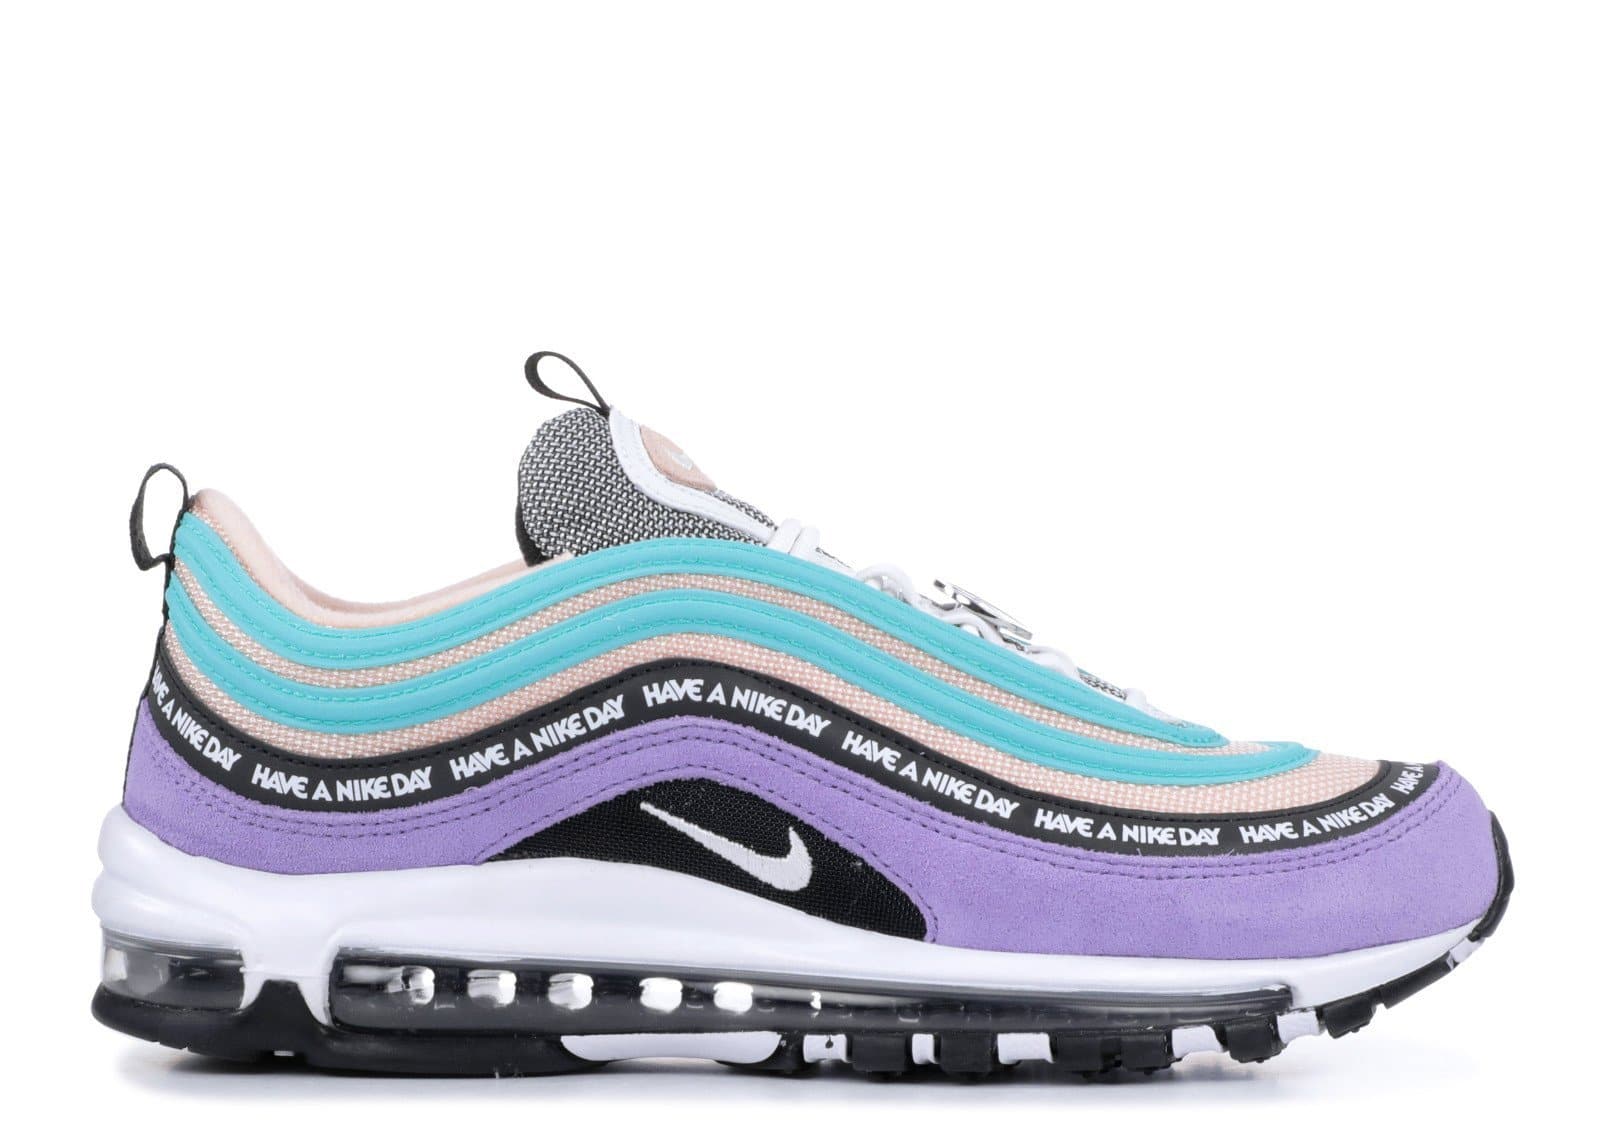 NIKE AIR 97 “HAVE A NIKE DAY”